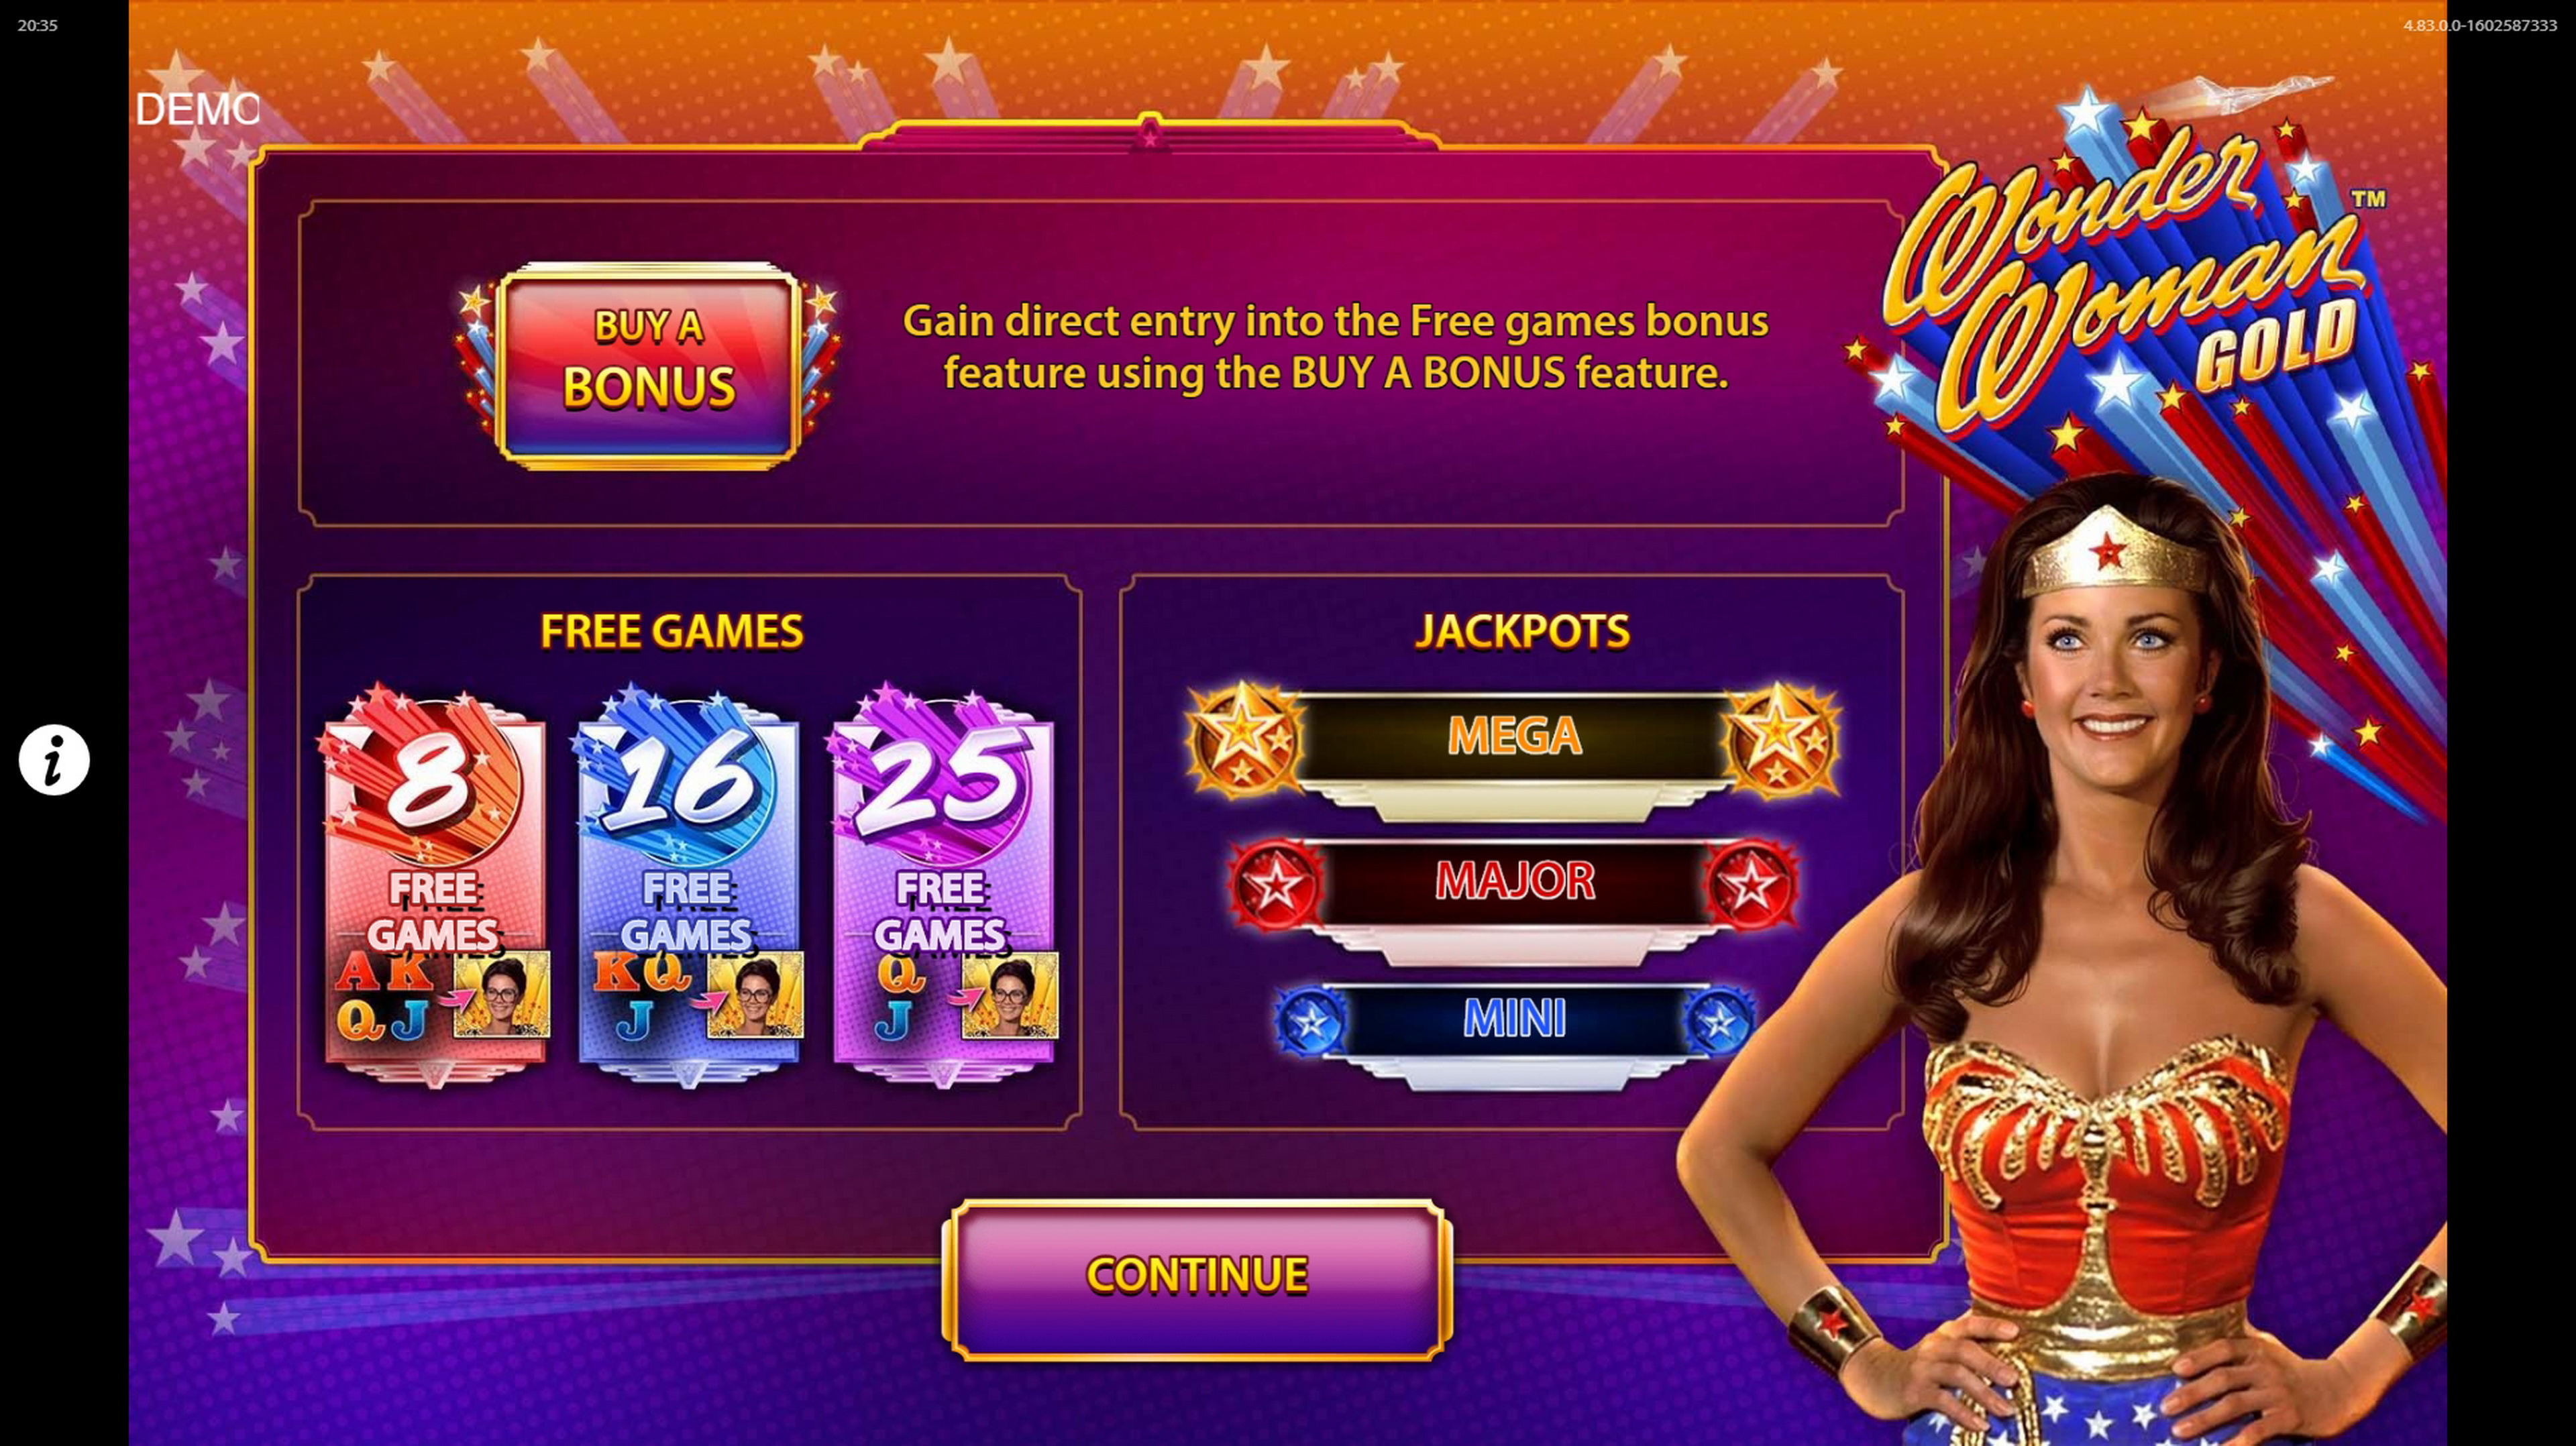 Play Wonder Woman Gold Free Casino Slot Game by Bally Technologies